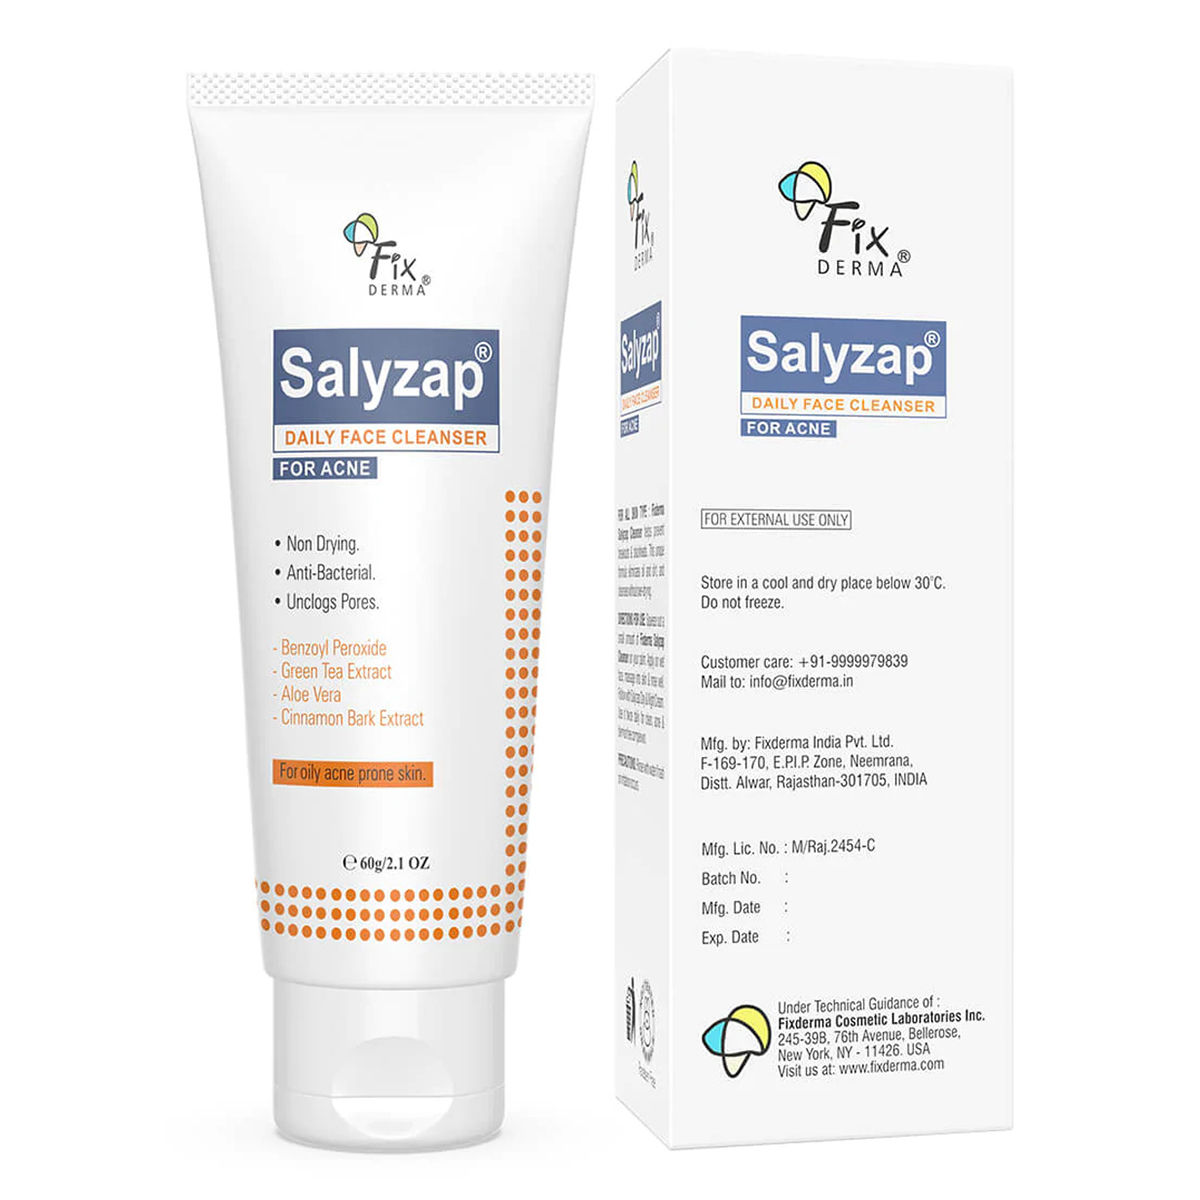 Buy Salyzap Daily Face Cleanser, 60 gm Online